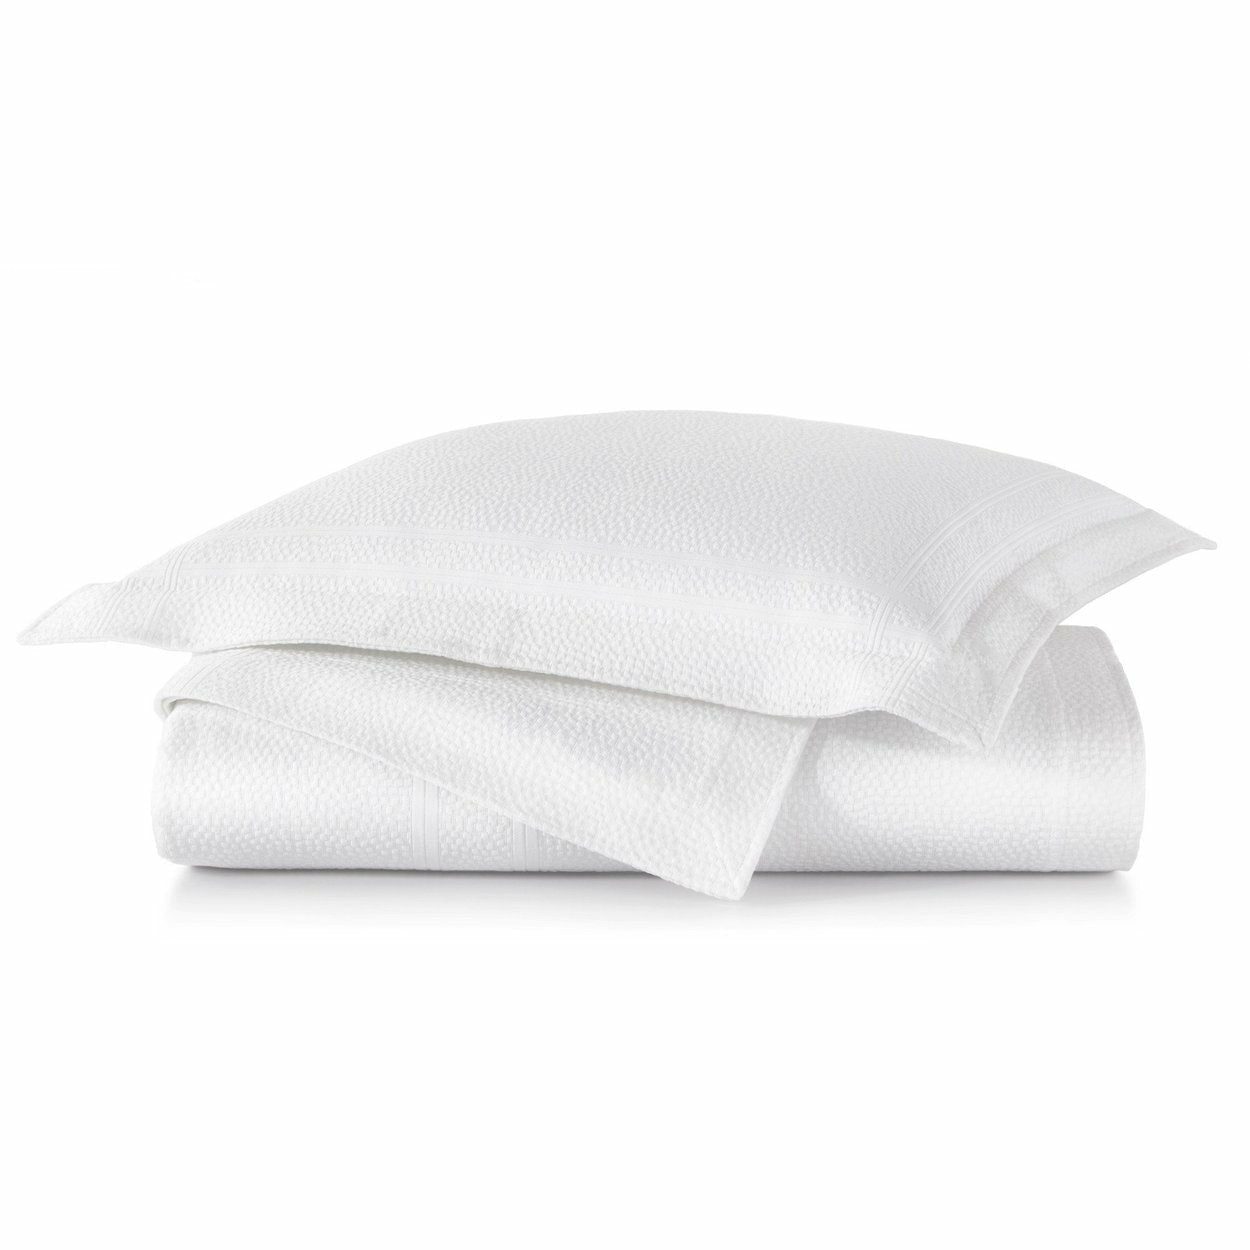 Peacock Alley Montauk Coverlets And Shams White Free Shipping